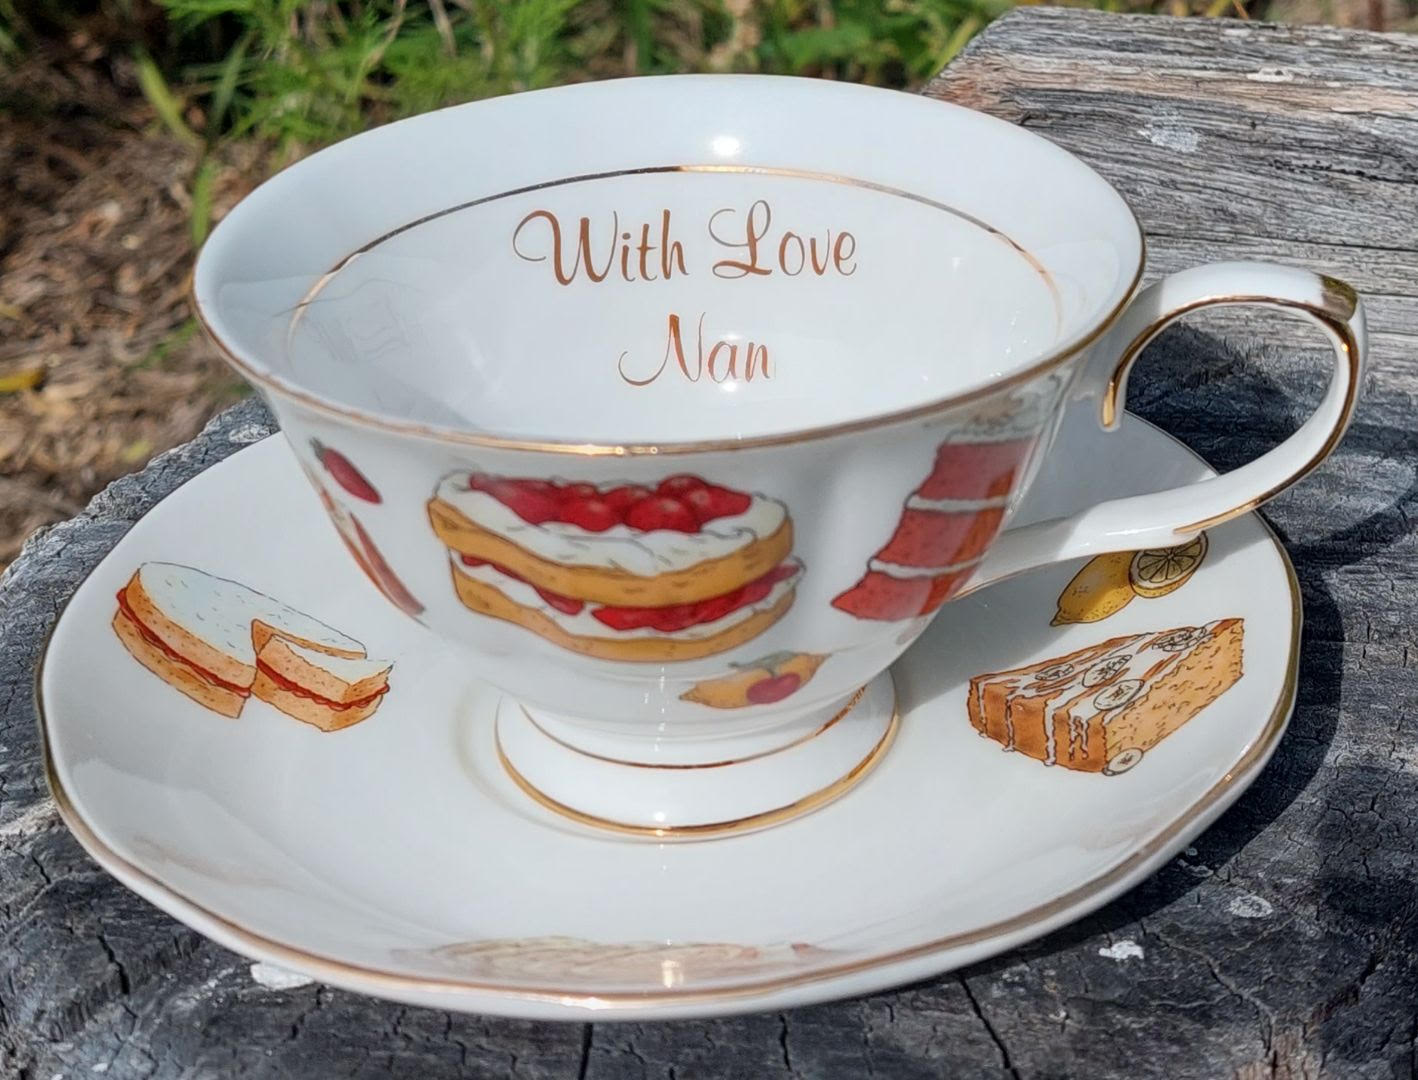 Cakes and Slices 1 cup & saucer set (Custom) with love Nan